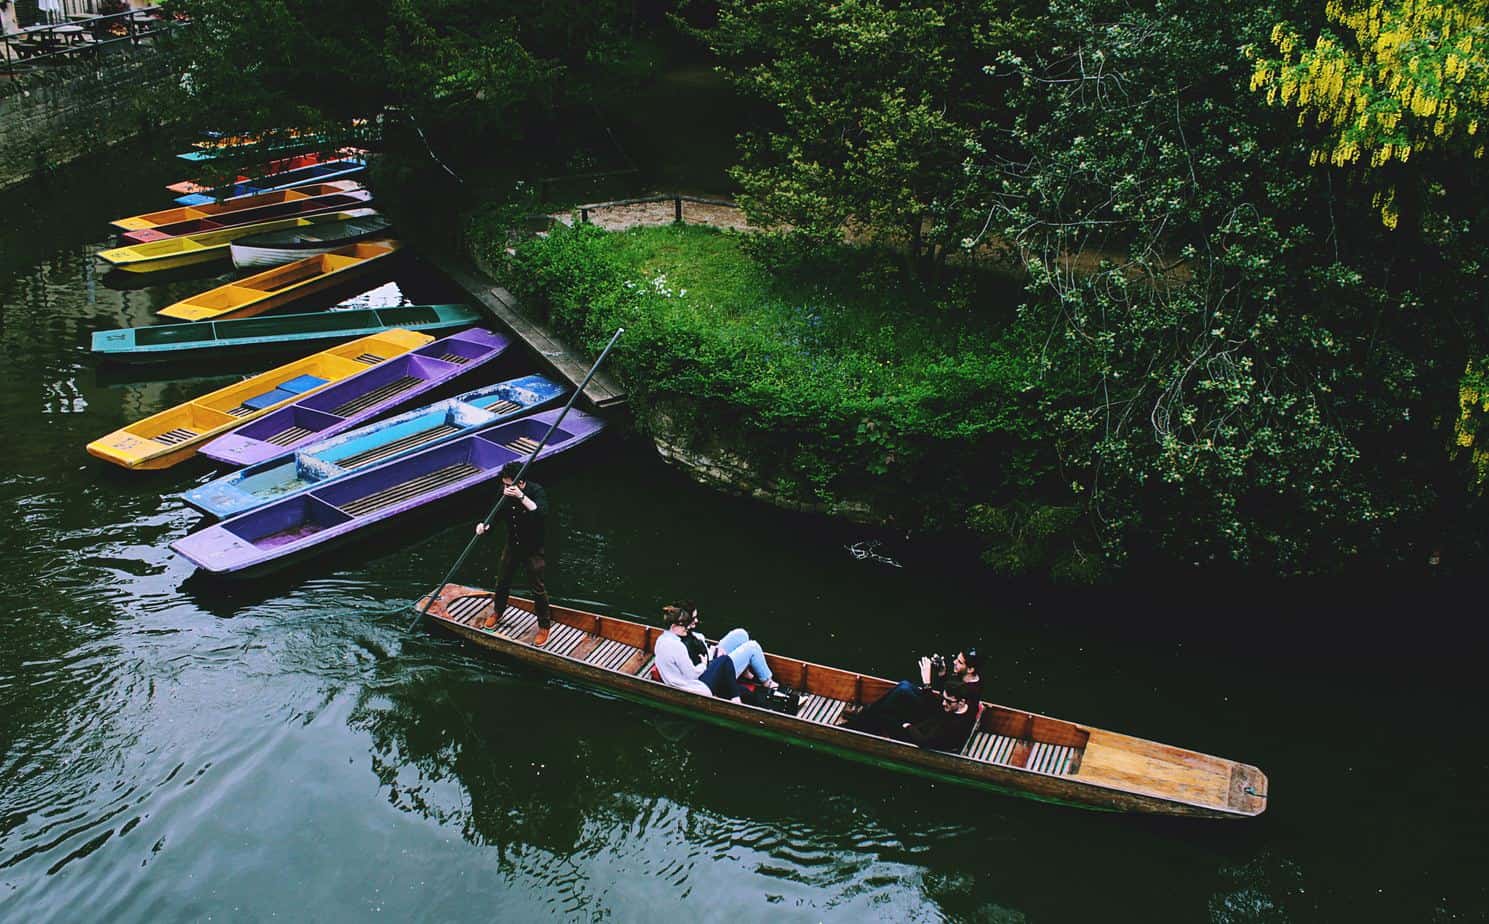 image of people punting on the river with colourful punts docked at the side of the river.